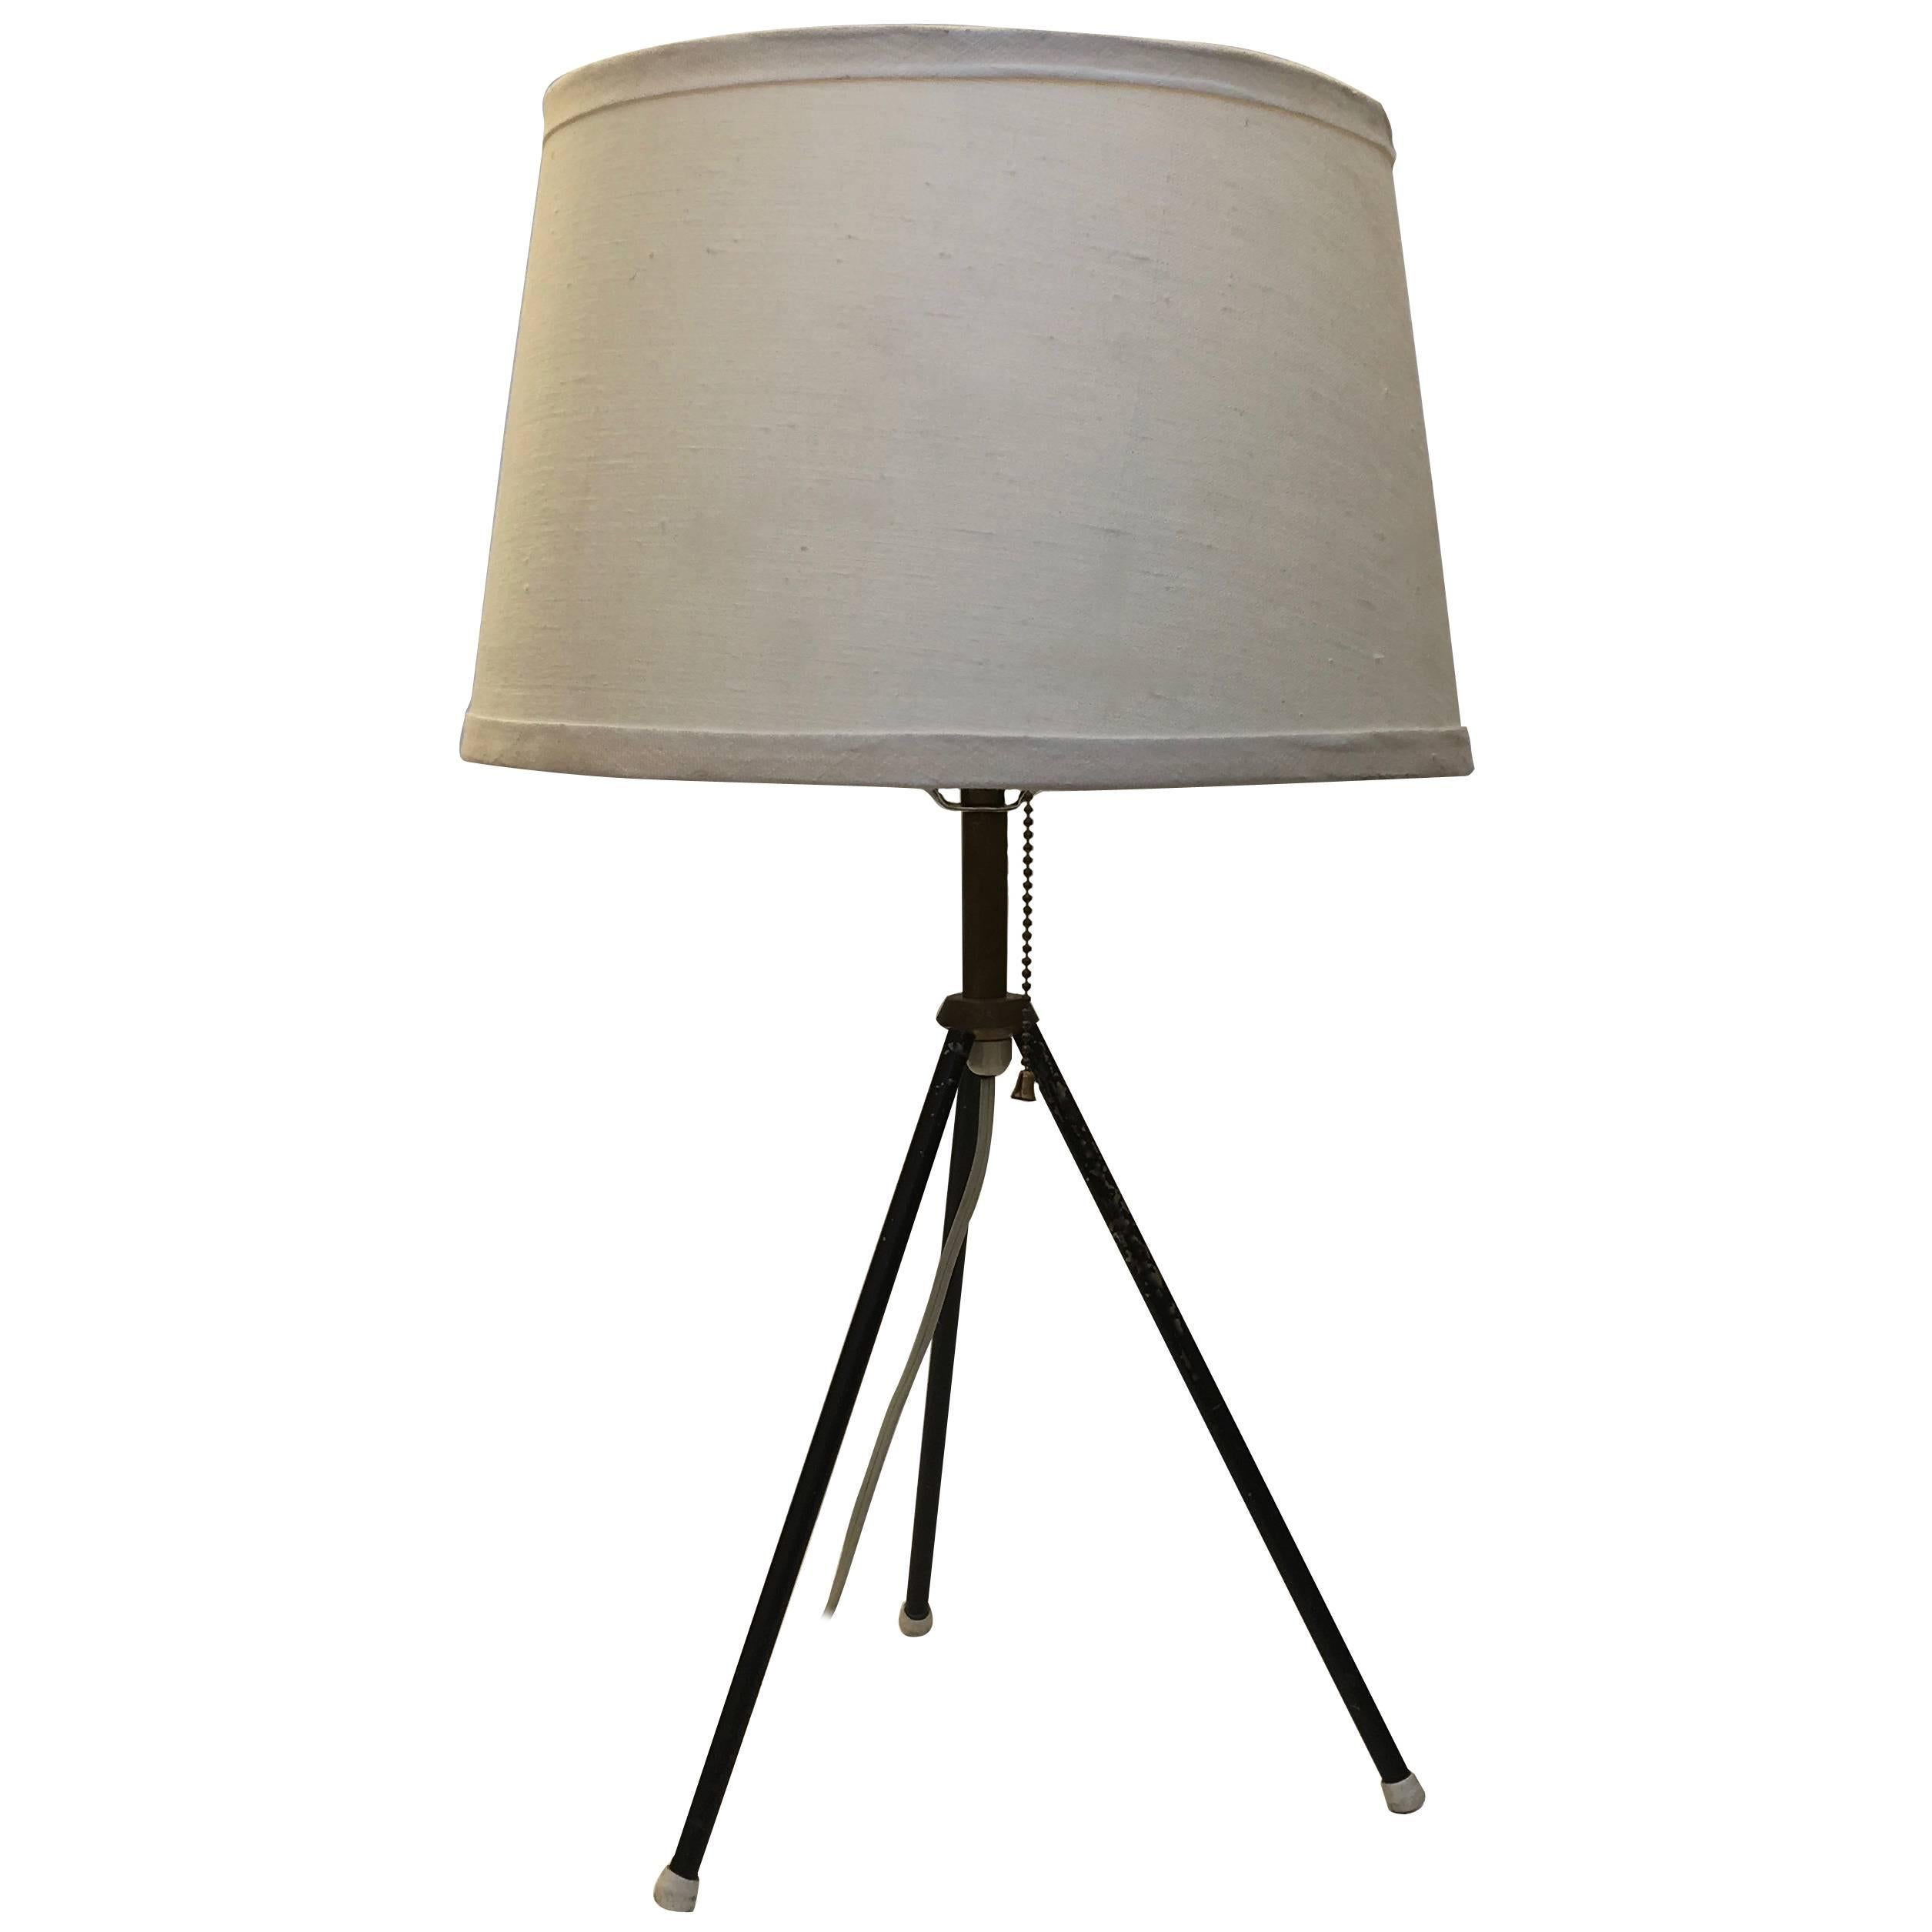 Midcentury Tripod Lamp For Sale